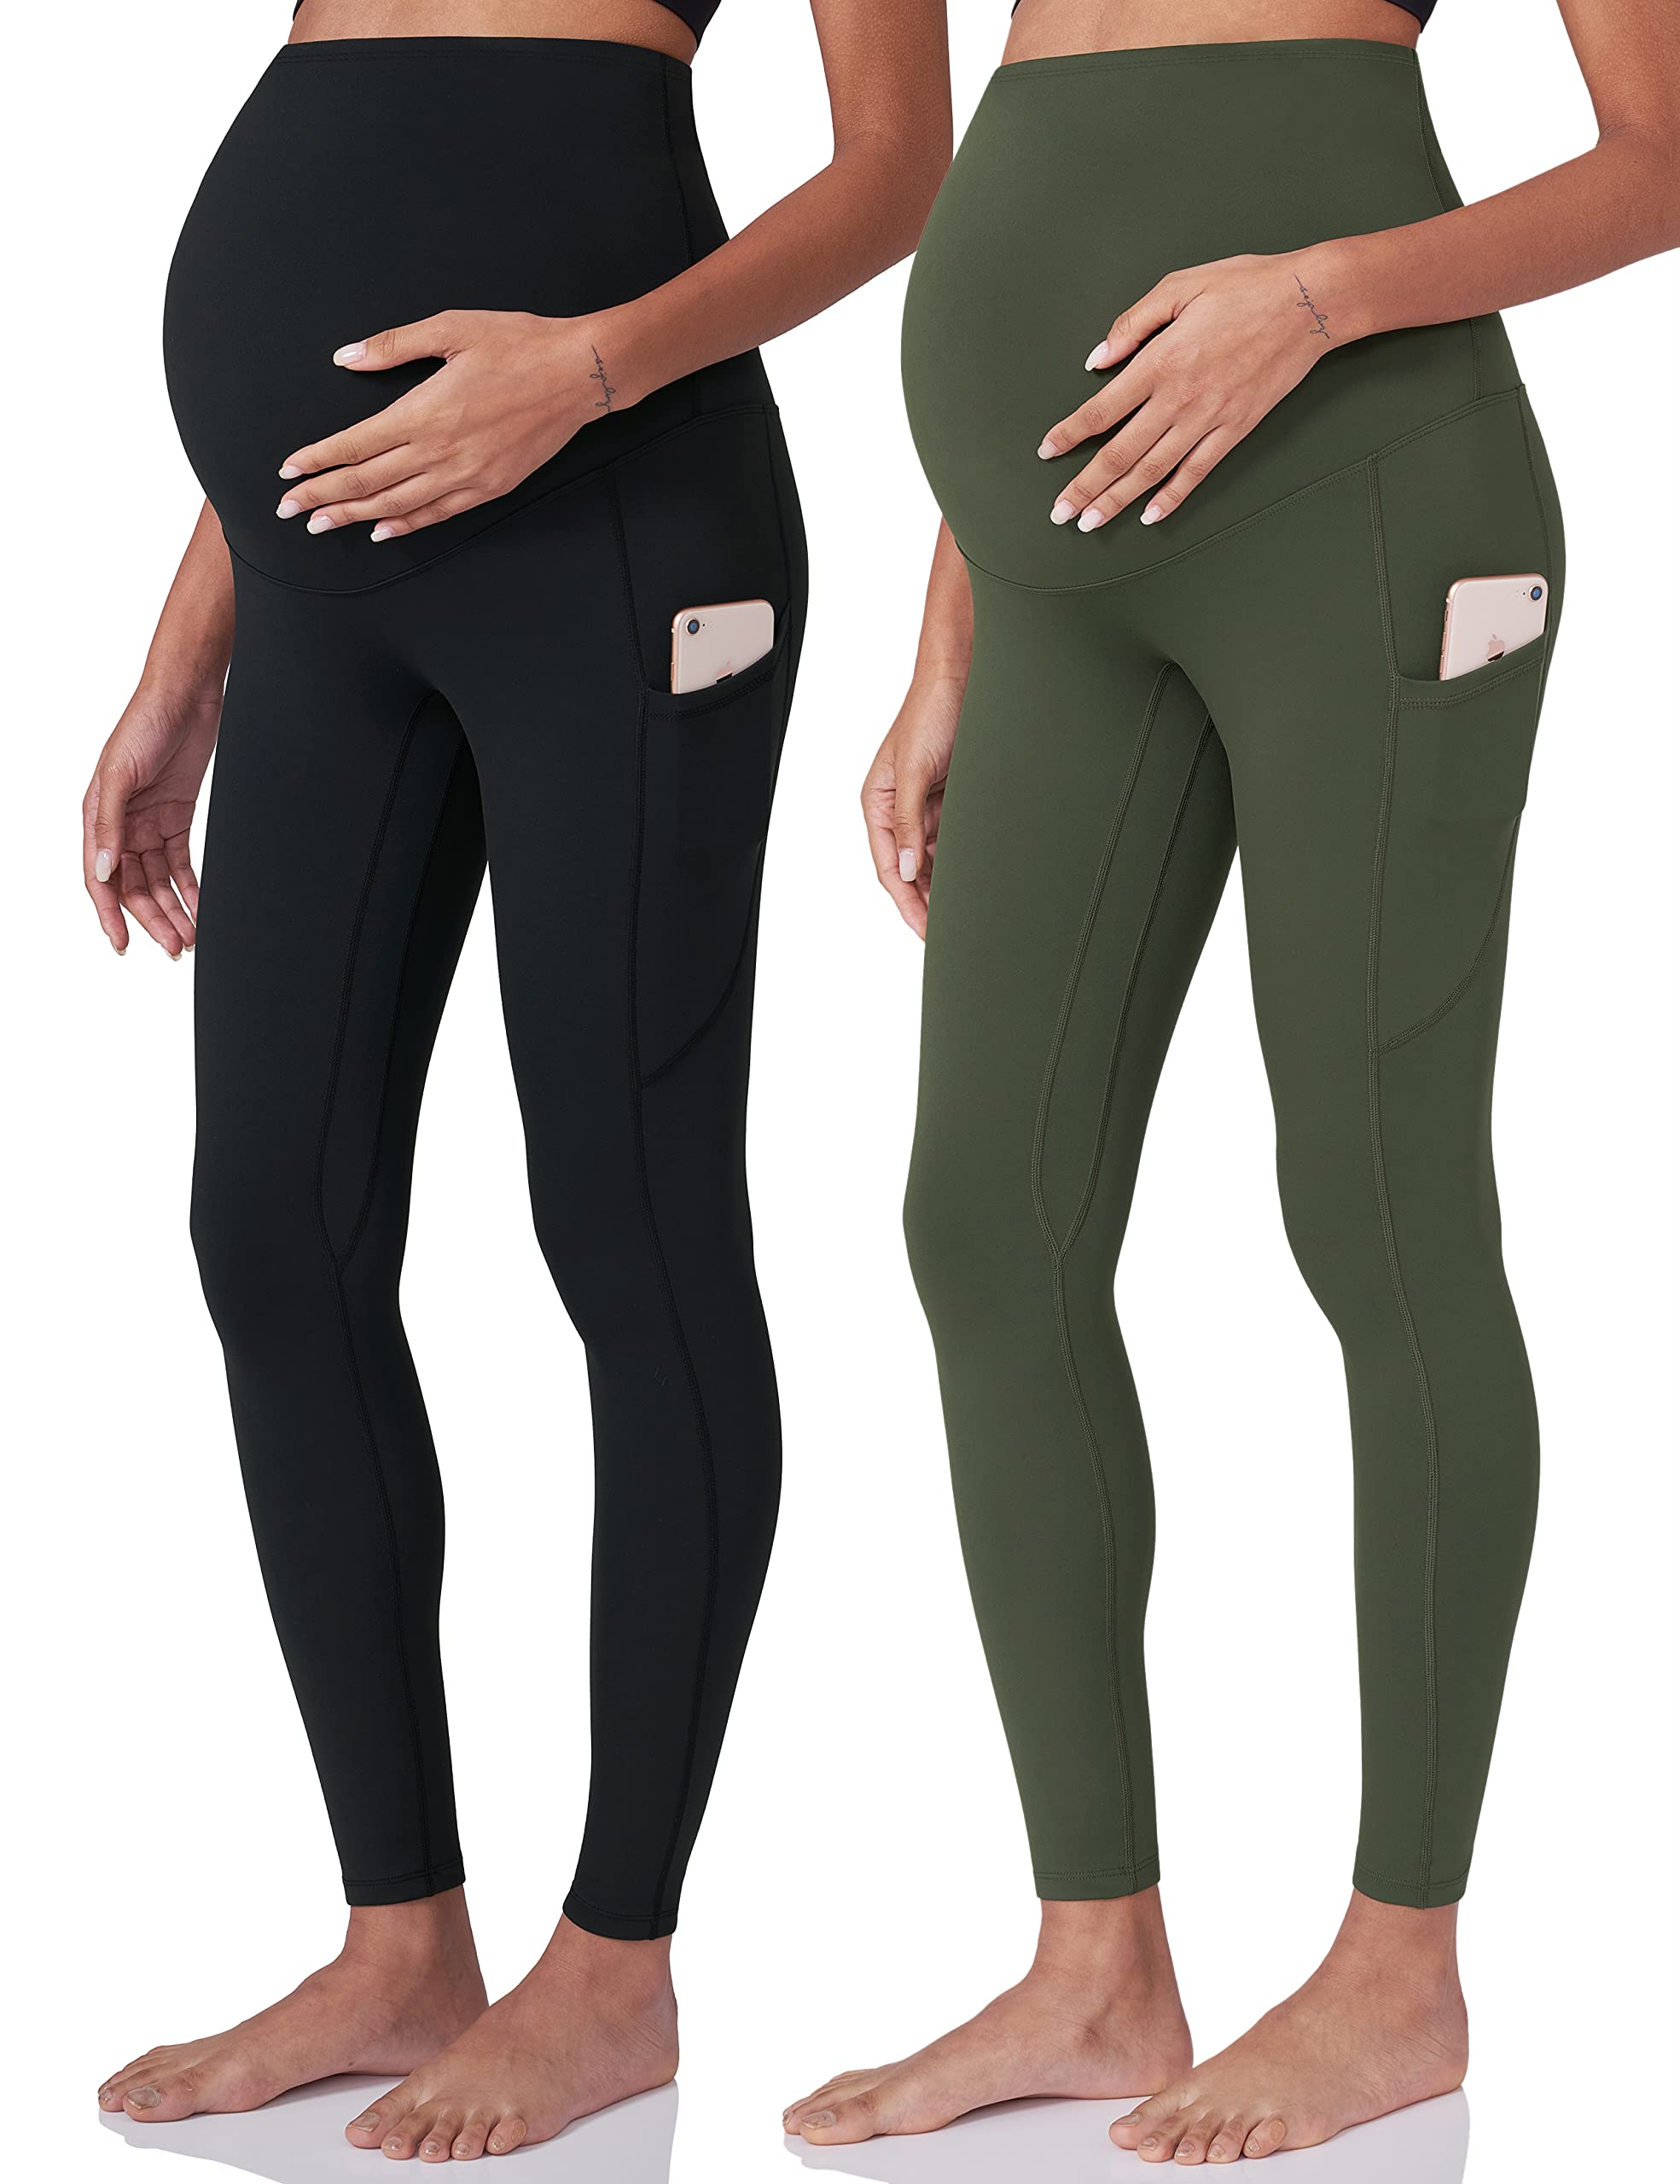 POSHDIVAH 2Pcs Womens Maternity Workout Leggings Over The Belly Pregnancy Yoga Pants with Pockets Soft Active Wear Work Pants Bl